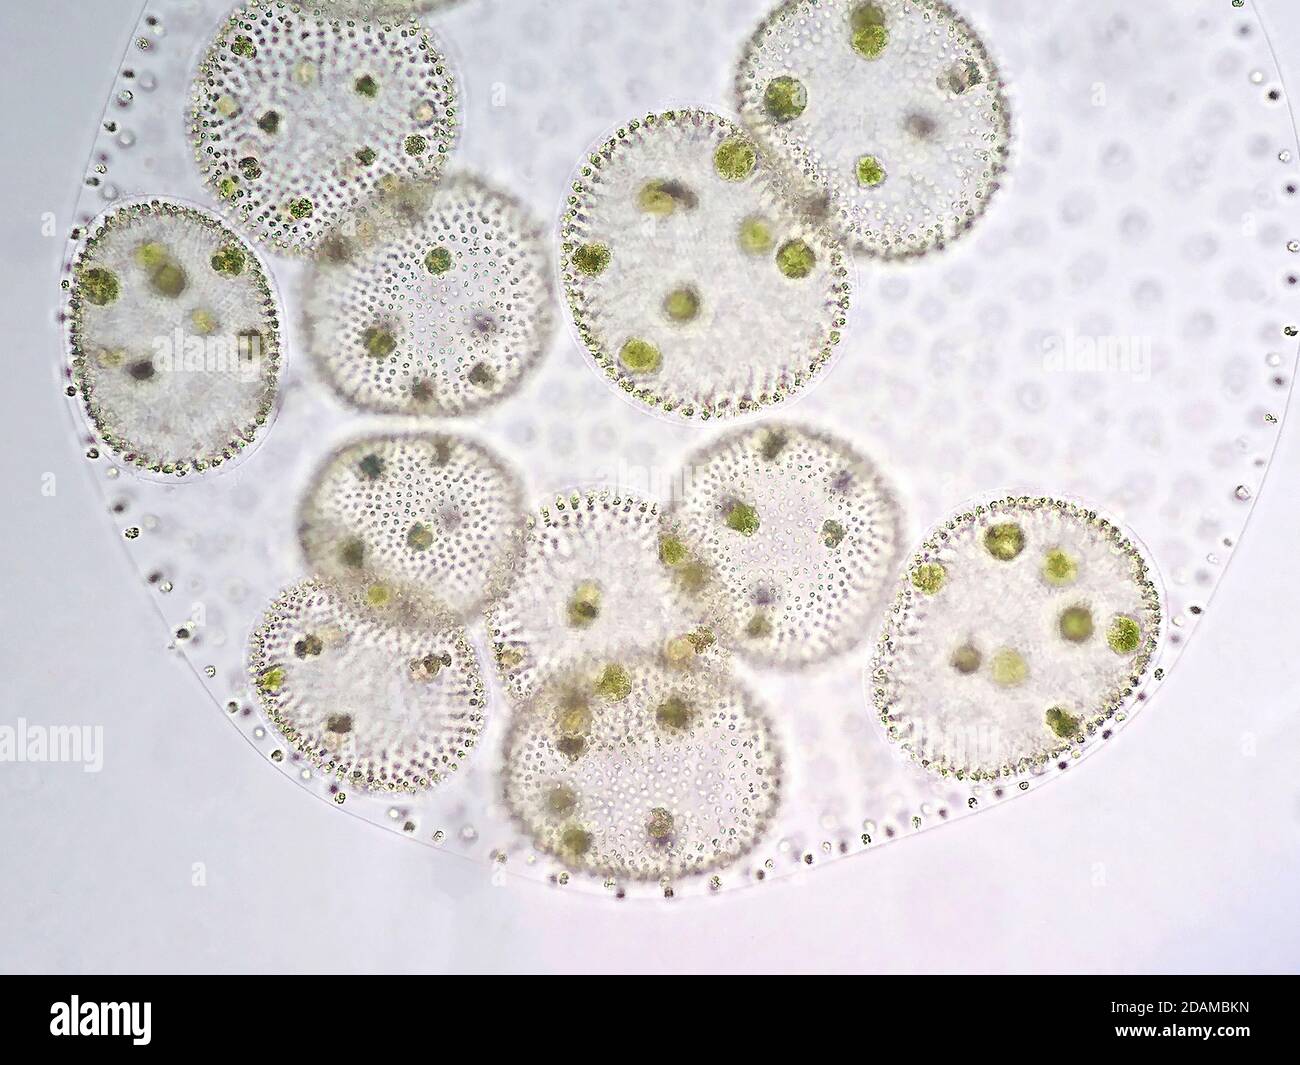 Volvox green algae, light micrograph. Volvox is a polyphyletic genus of chlorophyte green algae, or phytoplankton. They live in a variety of freshwate Stock Photo